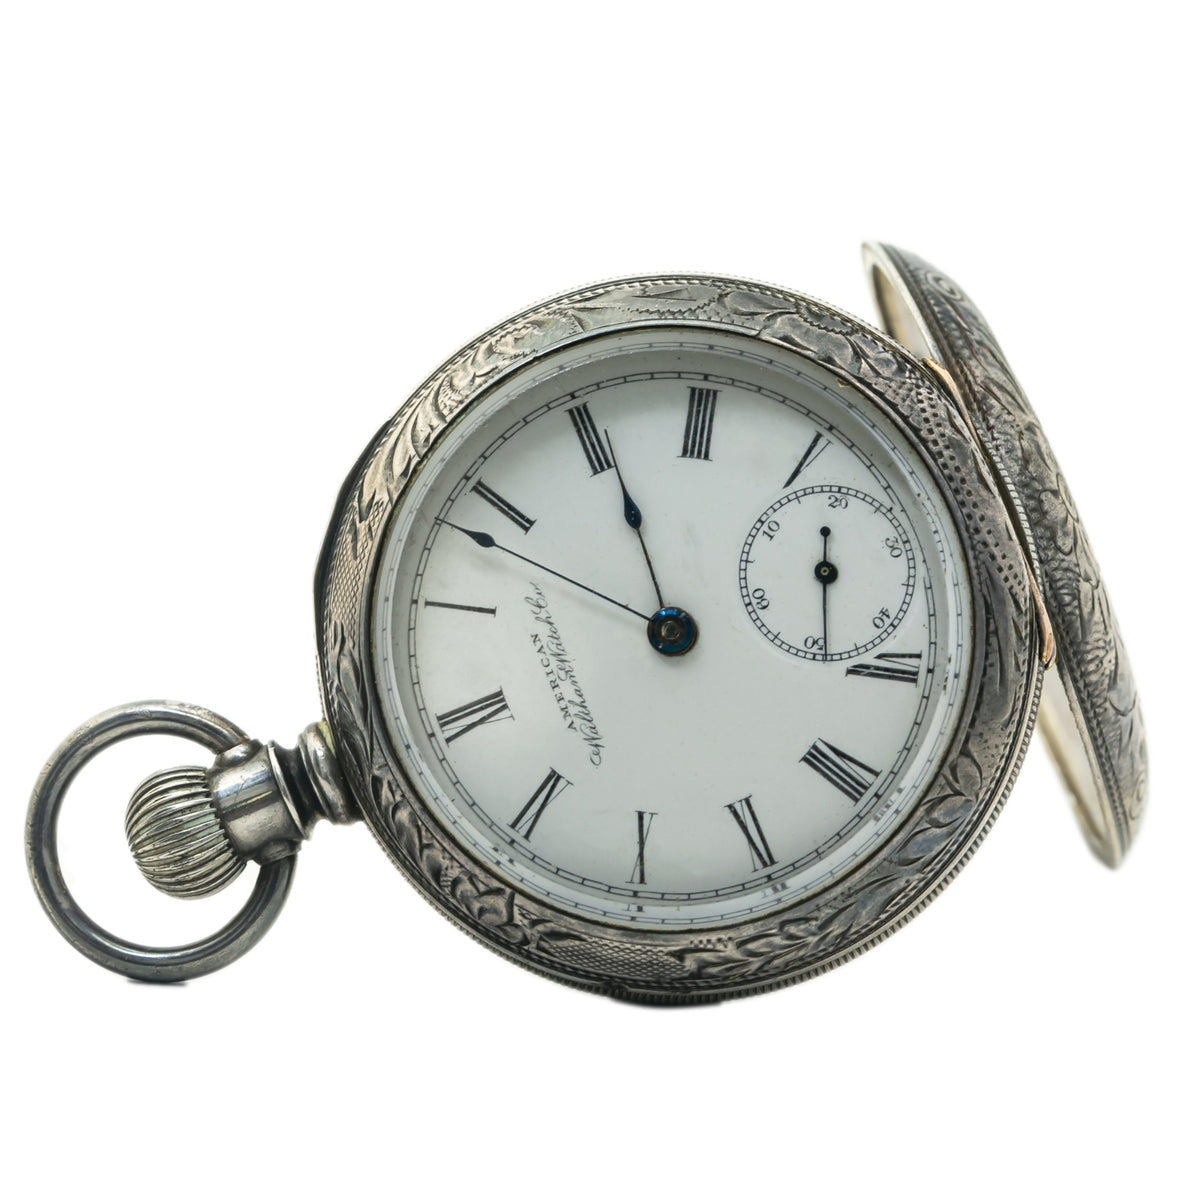 Waltham 149089 Vintage Silver Pocket Watch White Dial 56mm AS-IS